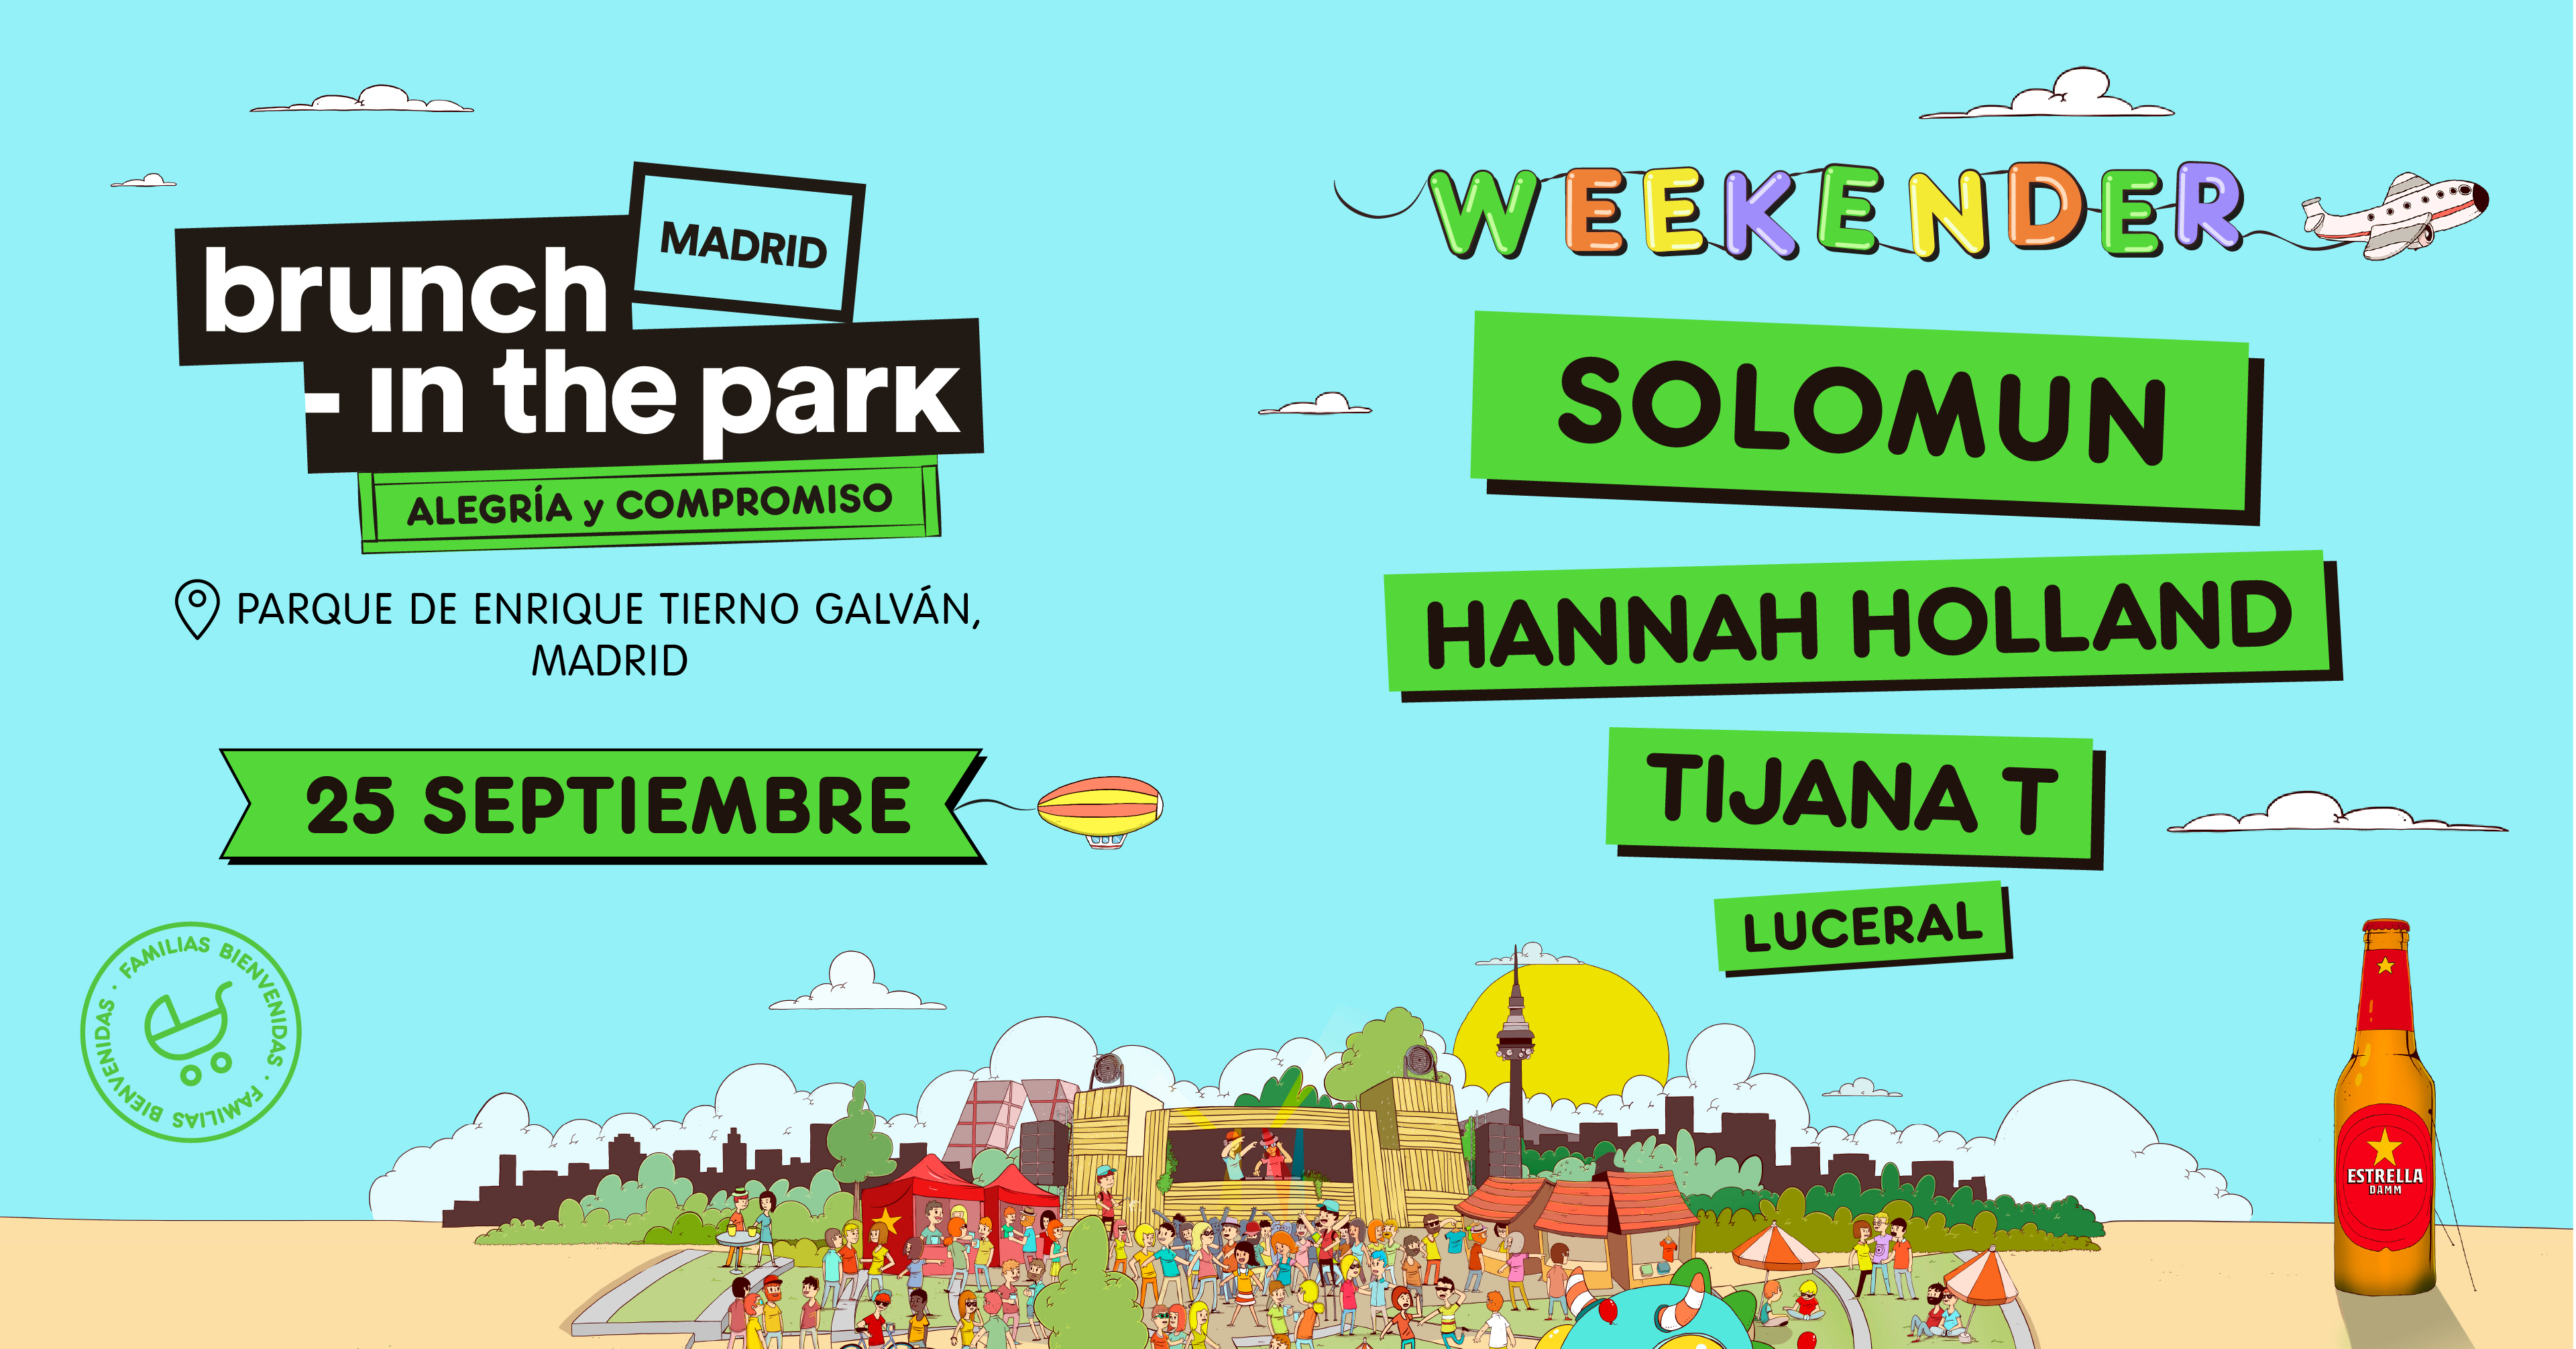 *SOLD OUT* Brunch -In the Park Madrid #8 - 25 septiembre: Solomun, Hannah Holland y más - Flyer back